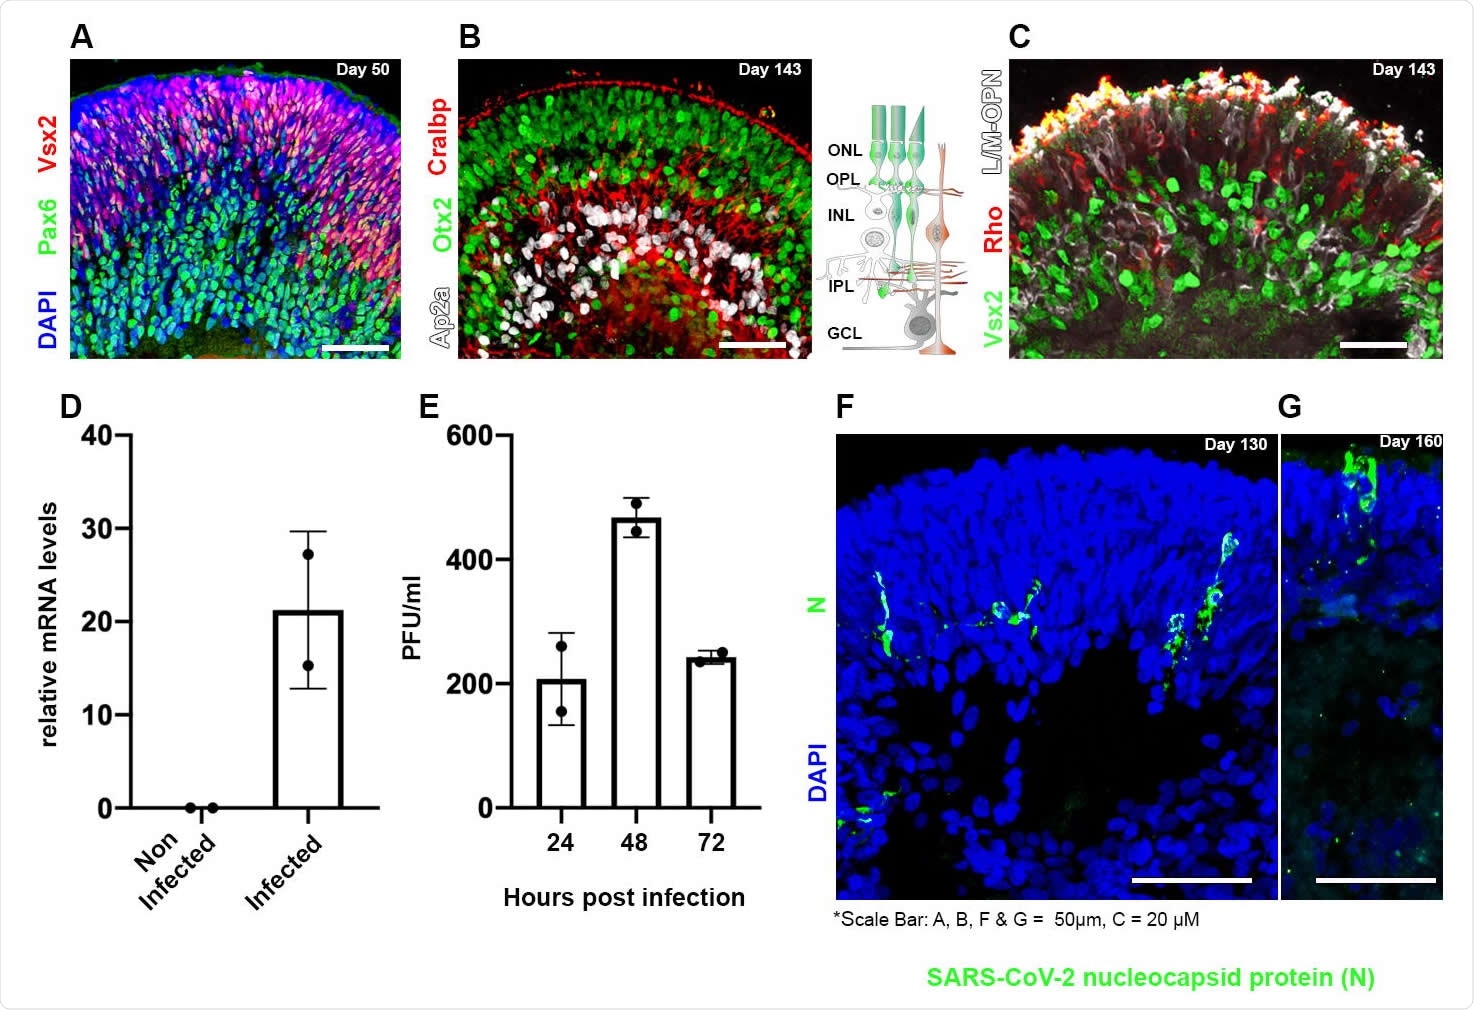 Human iPSC-derived retinal organoids can be infected by SARS-CoV-2 Retinal organoids on day 50 of differentiation are shown to contain VSX2+ (green) retinal progenitors and PAX6+ (white)/VSX2- amacrine and retinal ganglion cells (RGCs) (A). On day 143 of differentiation, the organoids are shown to be organized in a layered structure and to contain AP2a+ (white) amacrine and horizontal cells, CRALBP+ (red) Müller glia cells, and OTX2+ (green) cells (B). The sketch in (B) depicts the cell types and structure of the vertebrate retina. ONL: outer nuclear layer; OPL: outer plexiform layer; INL: inner nuclear layer; IPL: inner plexiform layer; GCL: ganglion cell layer. On day 143 of differentiation, the photoreceptors in the organoids are stained against the photosensitive proteins L/M-OPN (white) and RHODOPSIN (RHO, red) (C). Real-time PCR identified SARS-CoV-2 genomic RNA within retinal organoids treated with SARS-CoV-2 but not in controls on day 125 (D). A viral plaque assay was used to assess viral titrations in SARS-CoV-2 treated organoids on day 125 (E). Each repeat (N=2) in (D) and (E), is a separate group of five organoids infected or not infected in a separate well. Immunofluorescence analysis was used to detect SARSCoV-2 nucleocapsid (N)-positive cells in infected organoids at day 130 (F) or 160 (G) of differentiation.